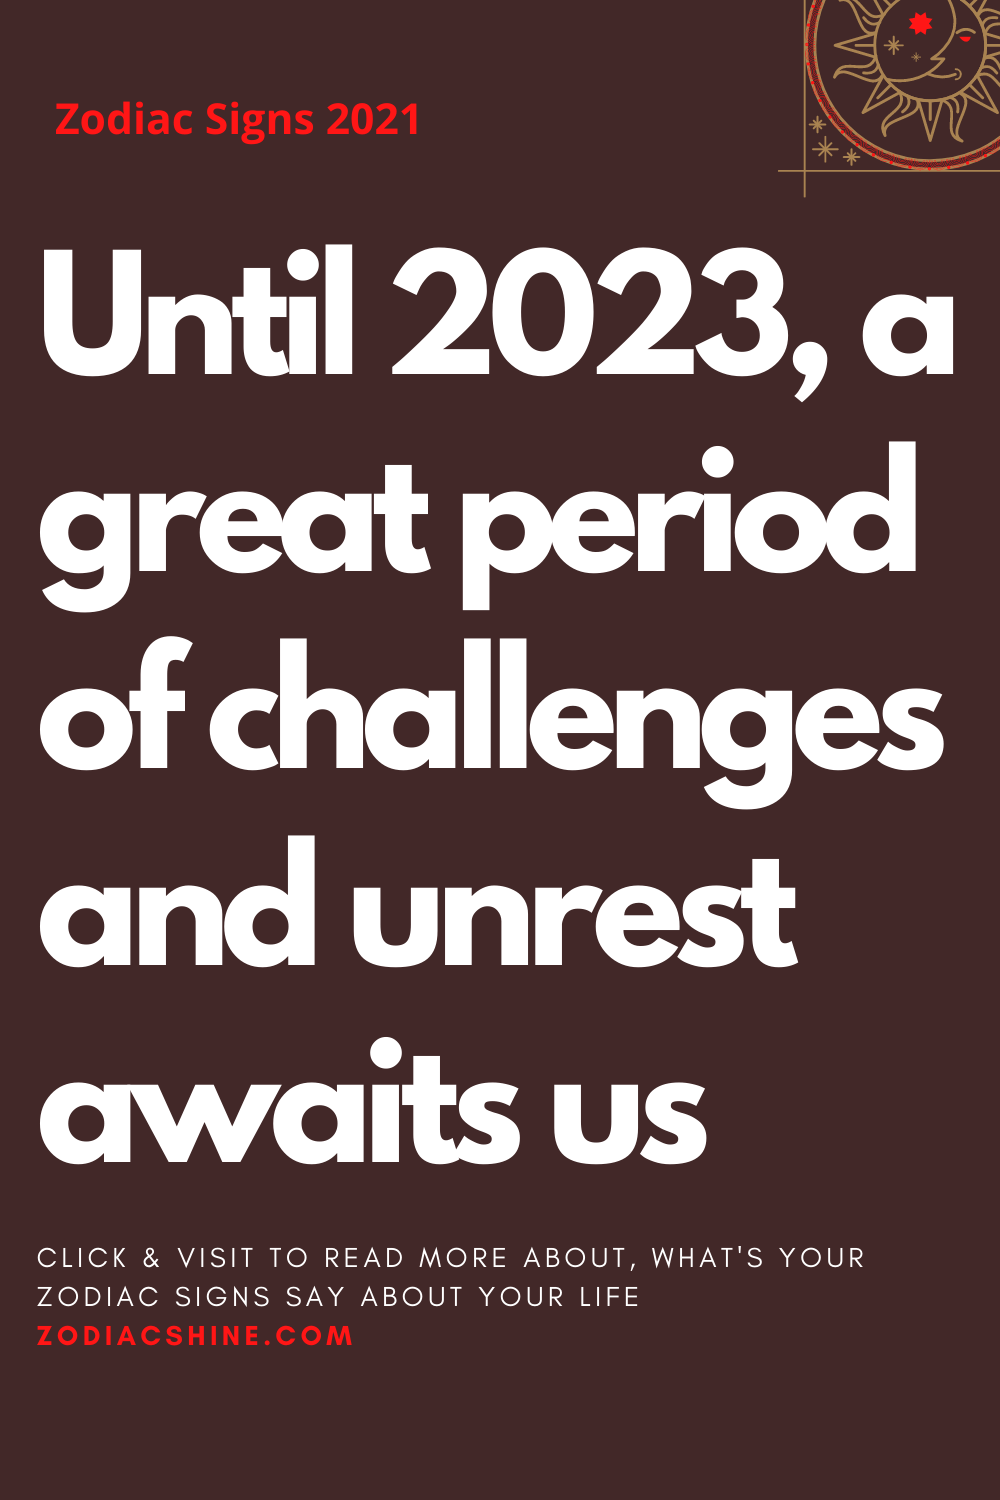 Until 2023 a great period of challenges and unrest awaits us